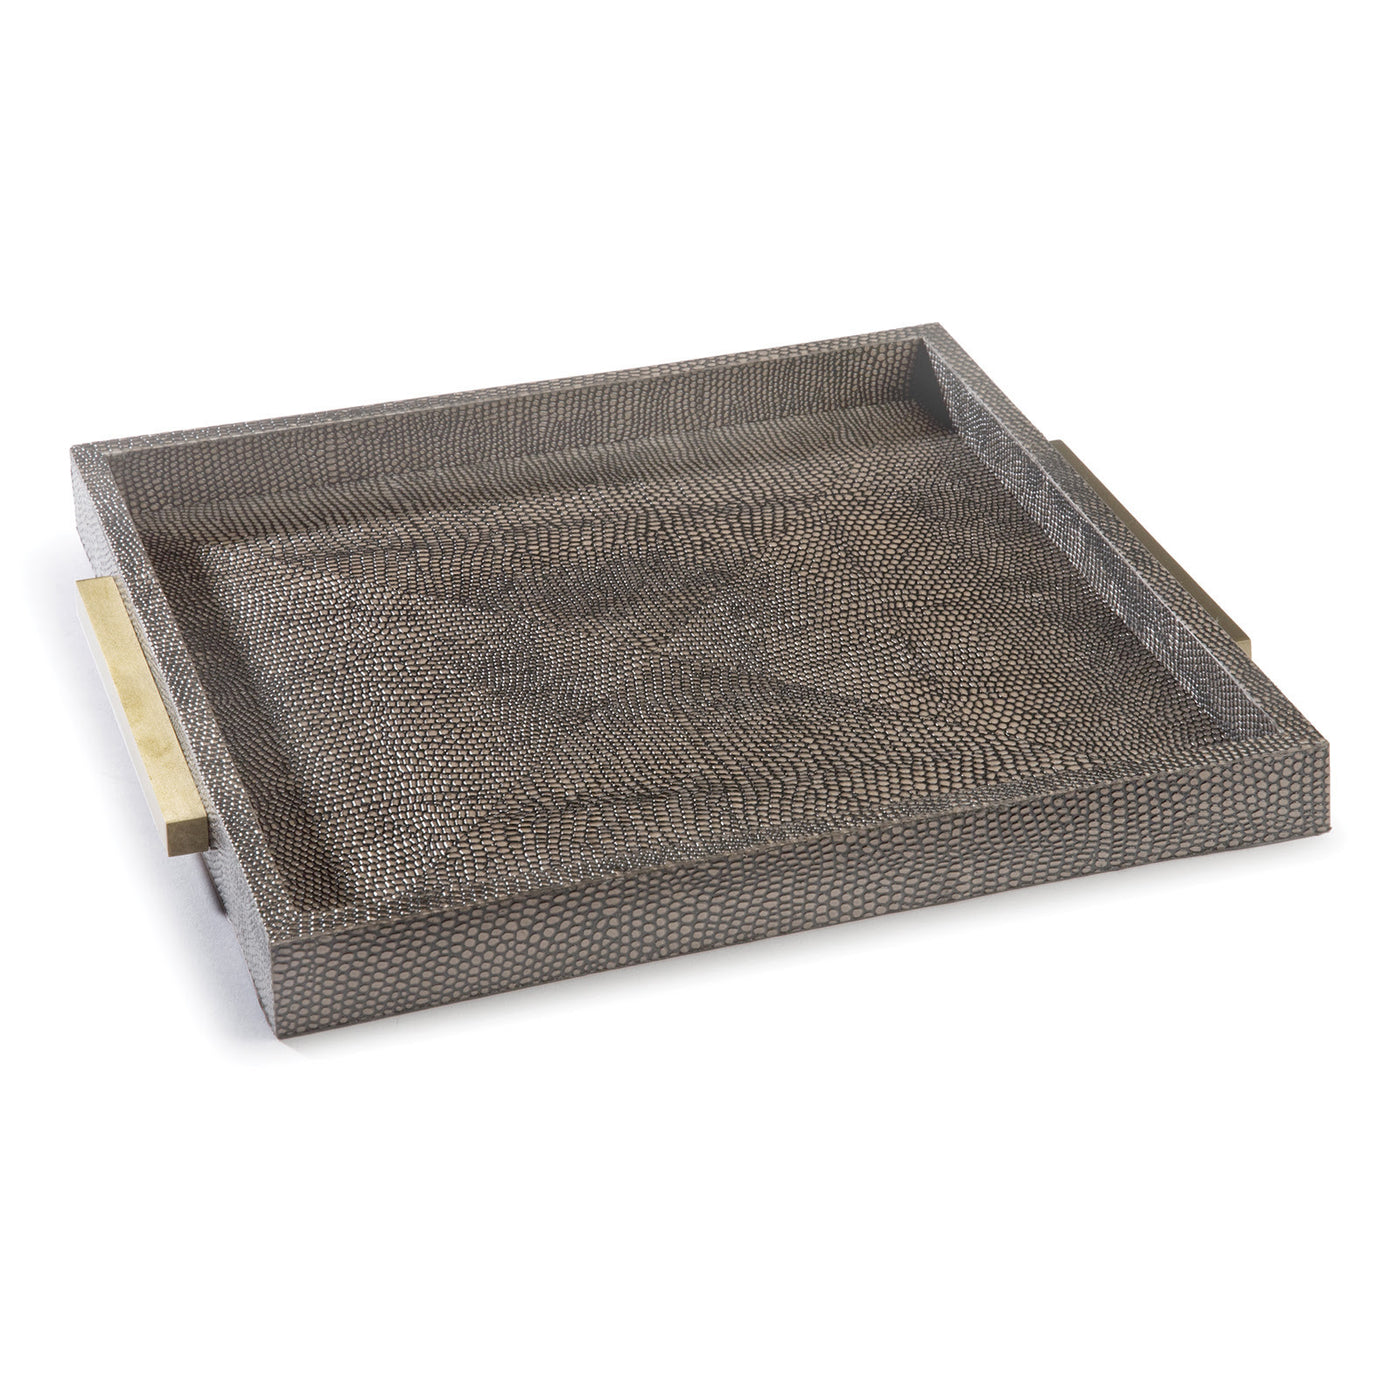 TRAY BROWN SNAKE SHAGREEN SQUARE